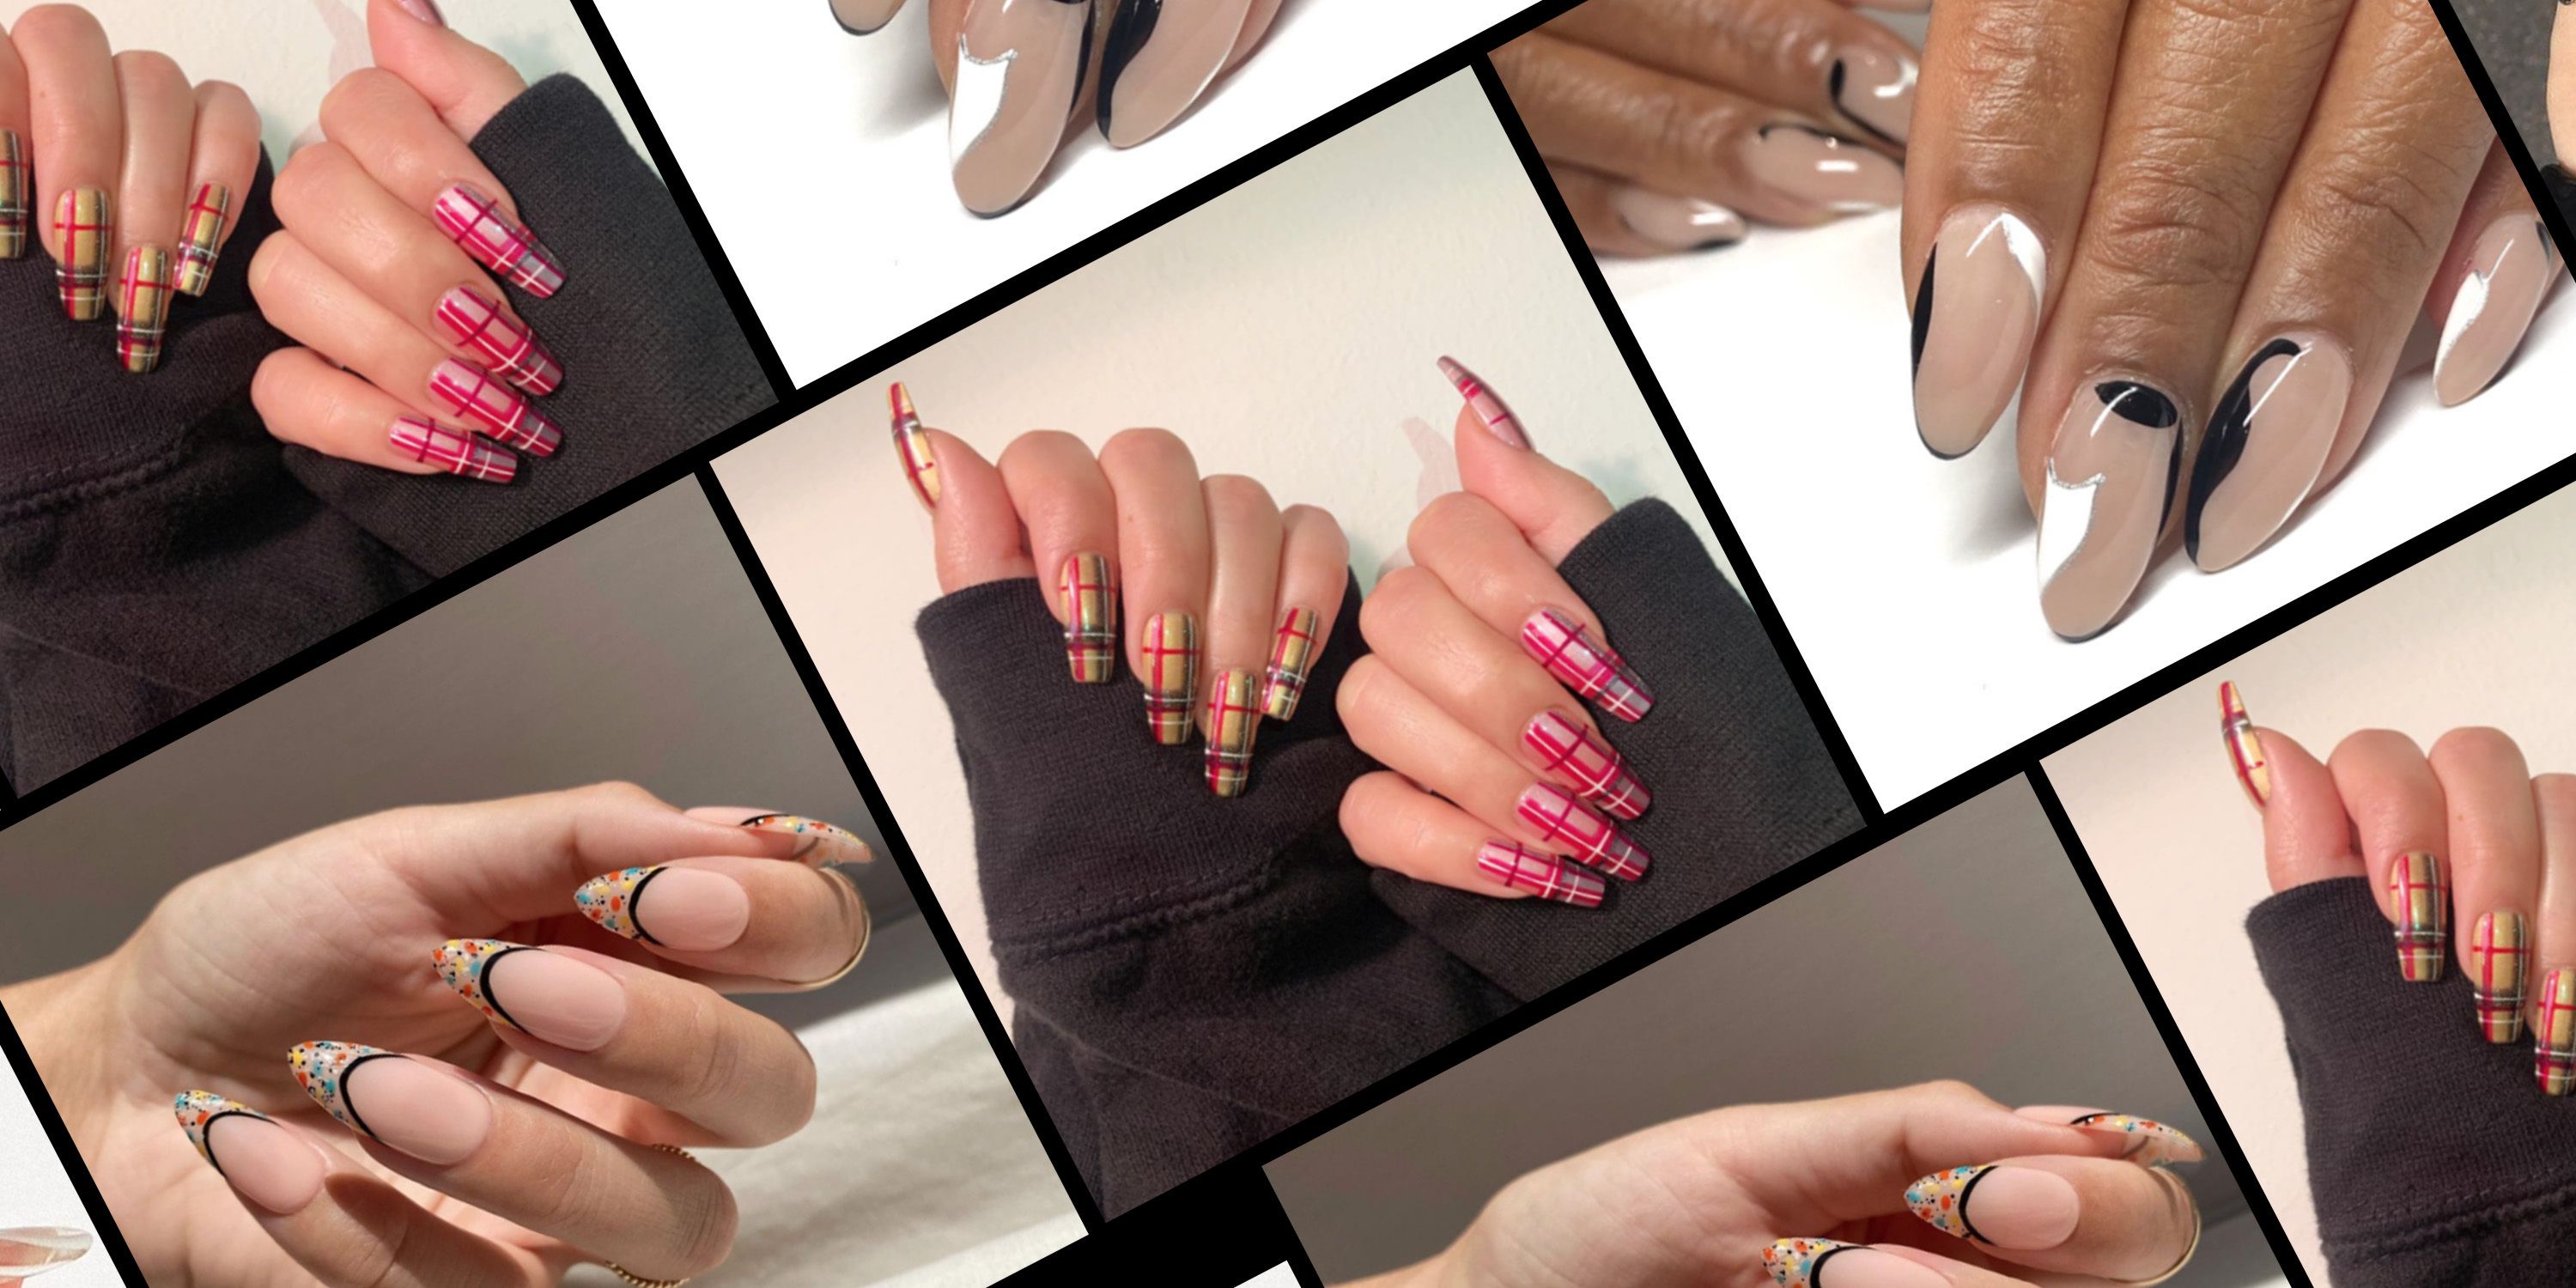 Top 8 most popular acrylic nail shapes and how to choose one that suits you